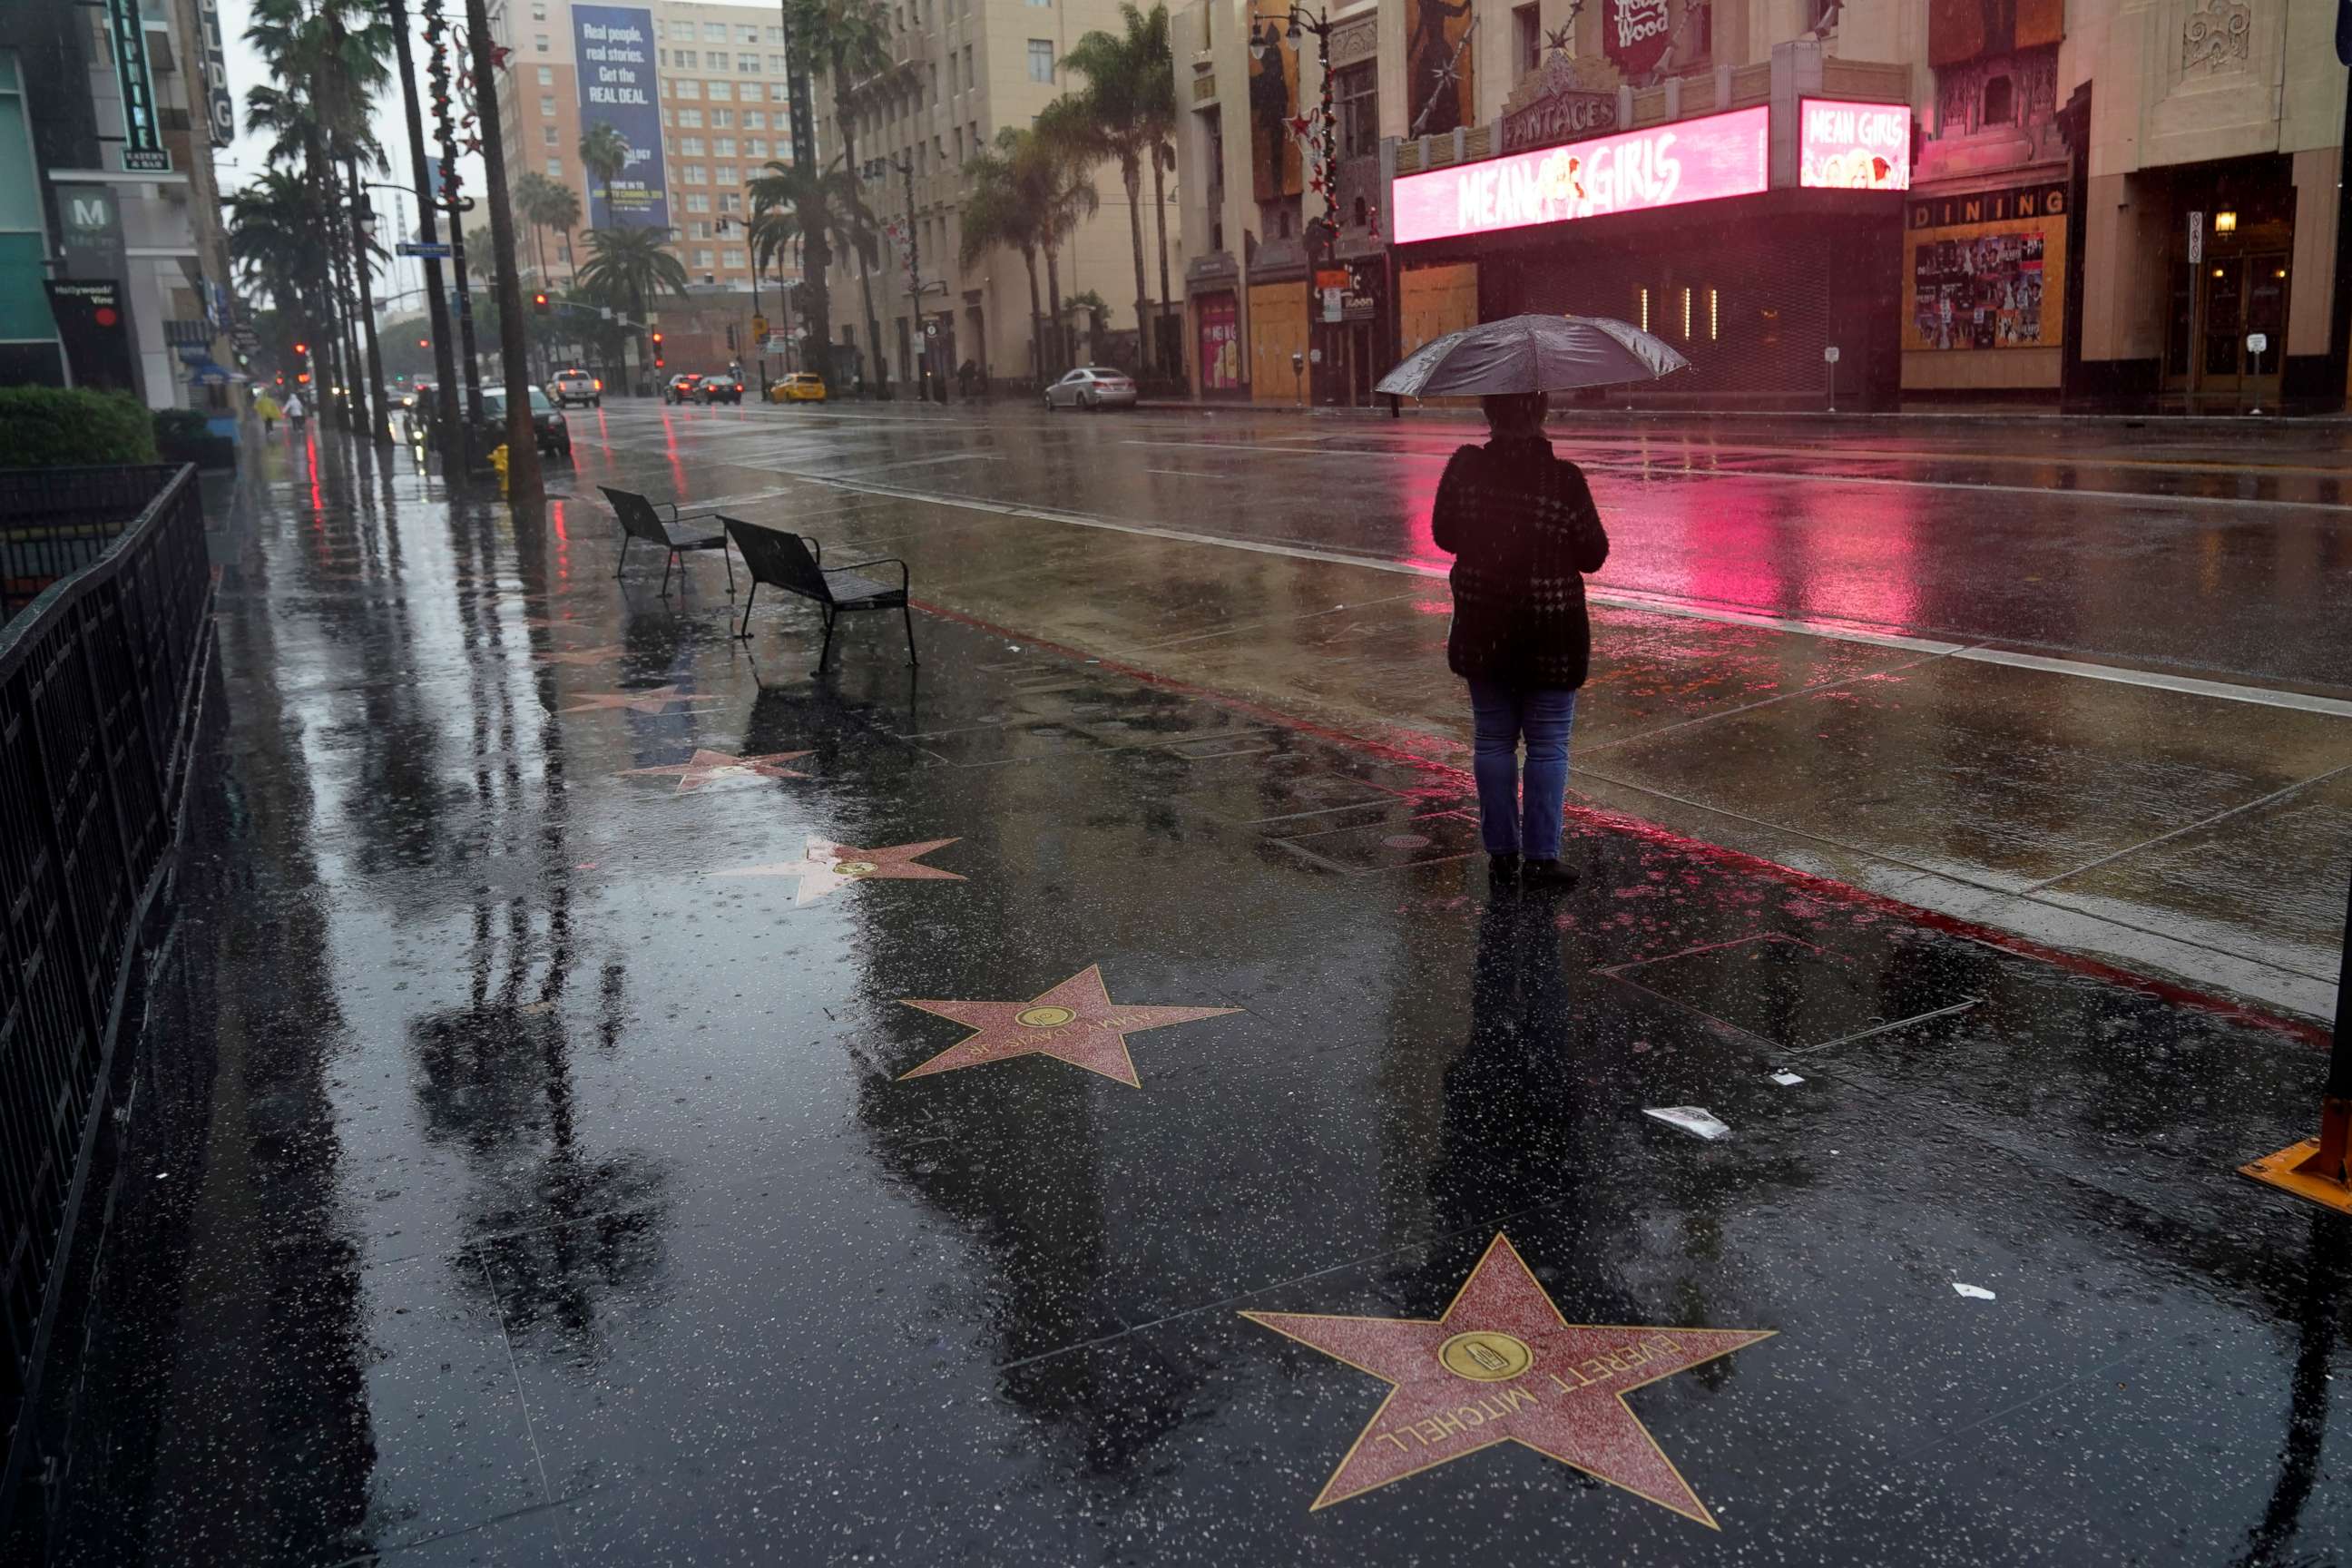 PHOTO: A woman waits at a bus stop in the rain on Dec. 28, 2020, in the Hollywood section of Los Angeles.